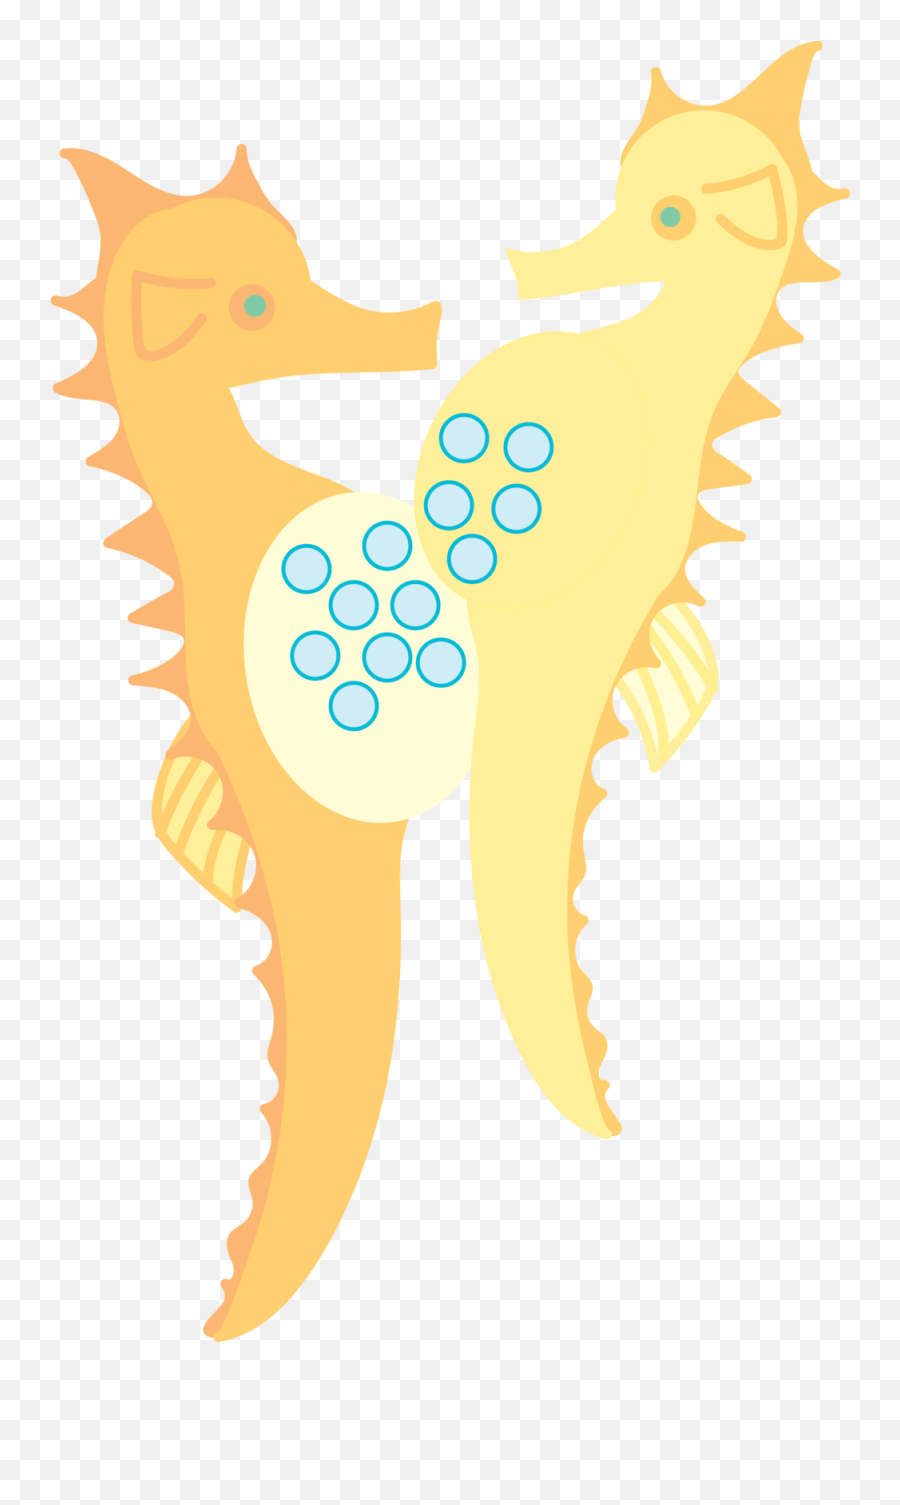 Seahorse Pregnant - Seahorse 1000x1629 Png Clipart Download Illustration,Seahorse Png